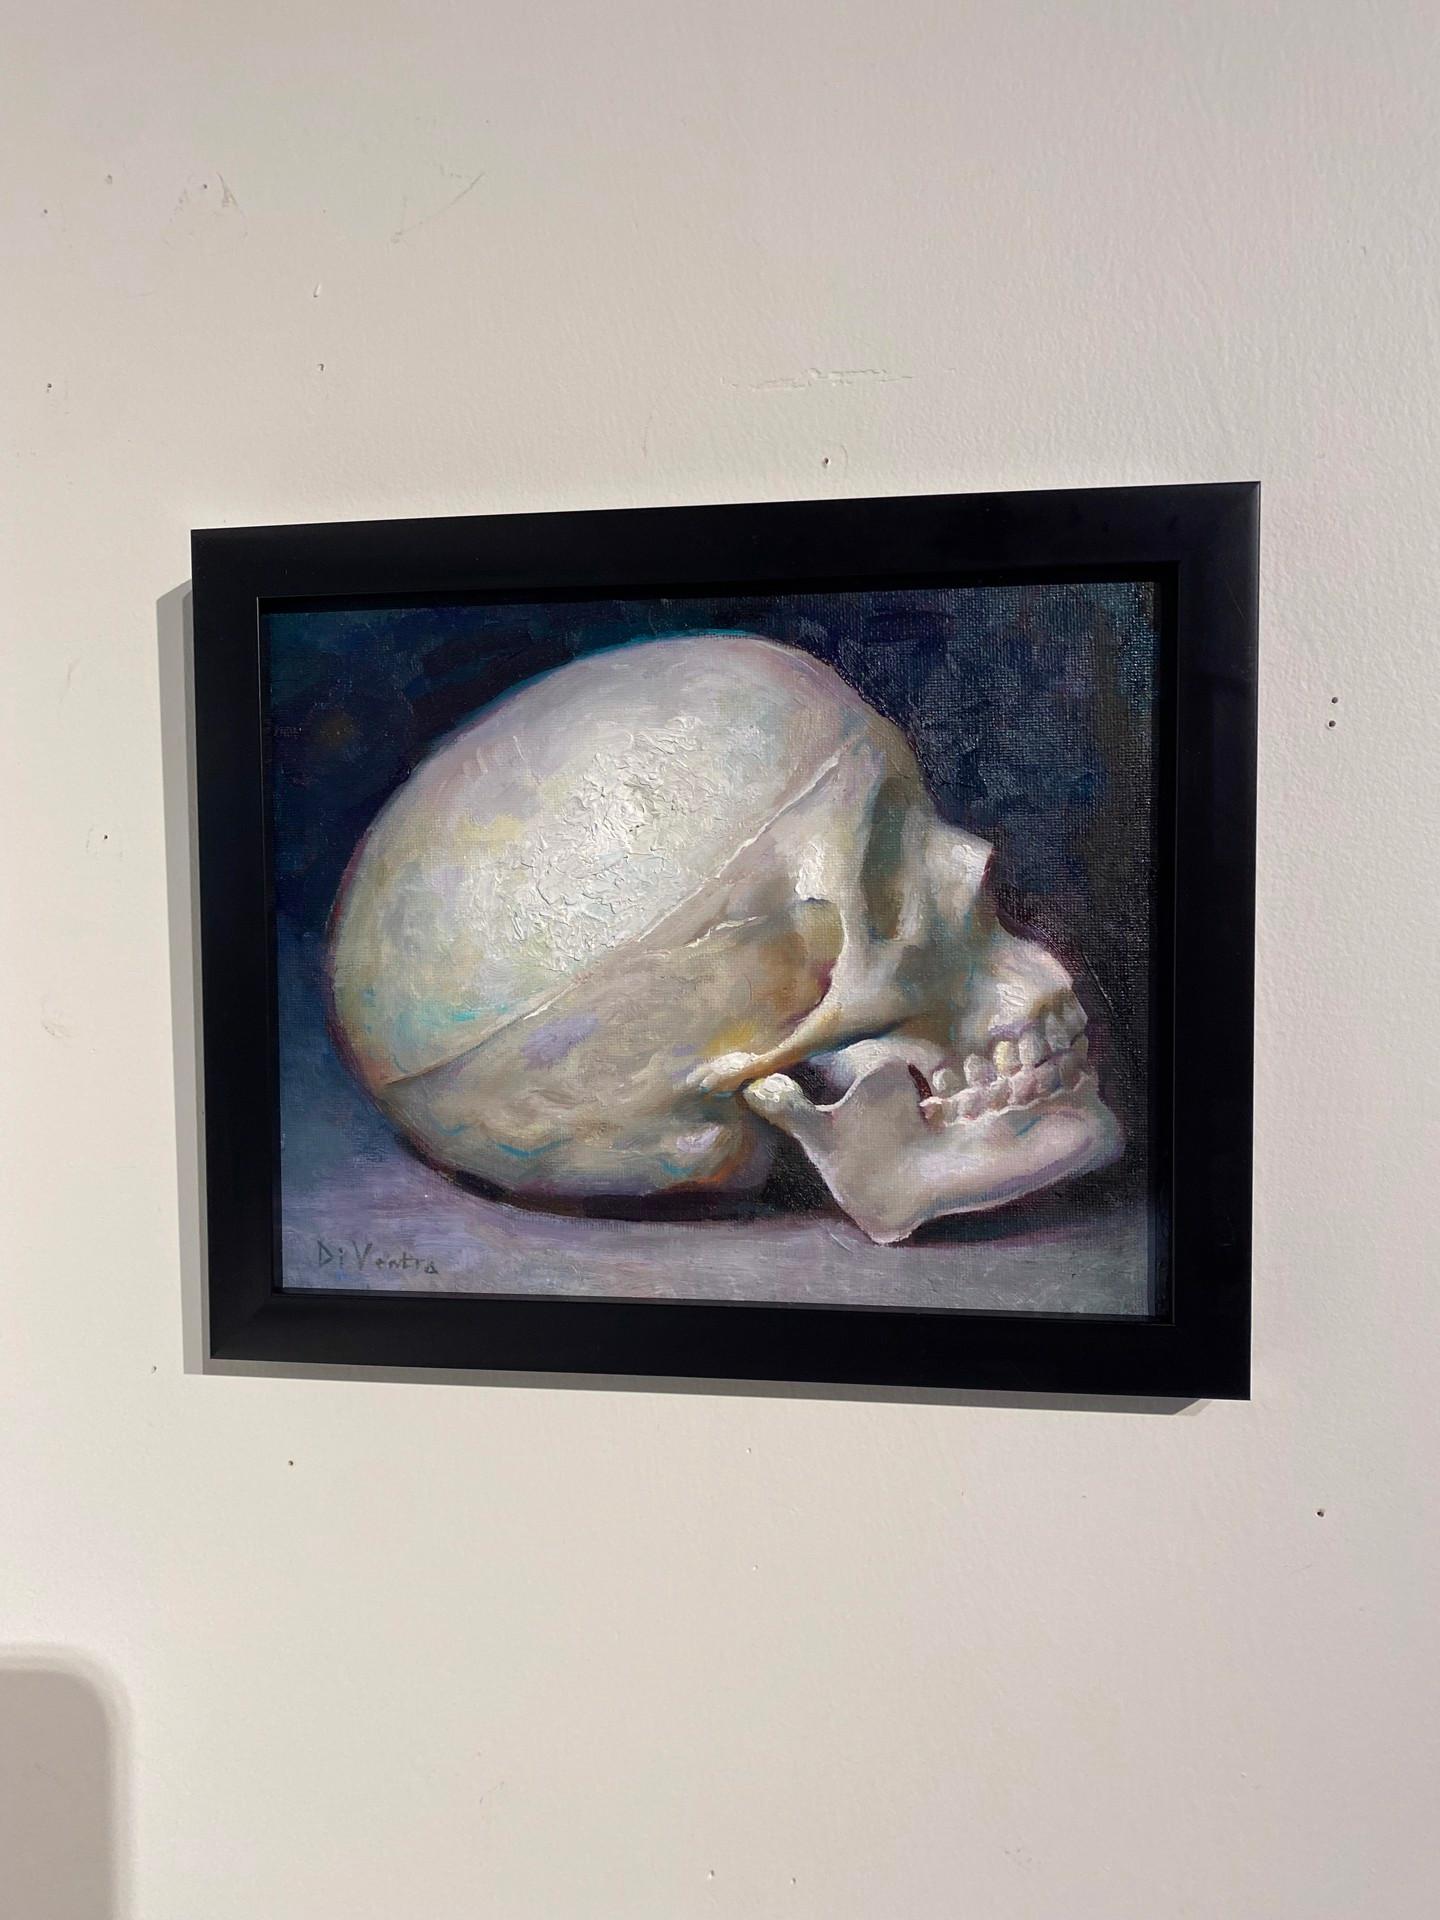 Bedside Skull - Painting by Matteo Di Ventra